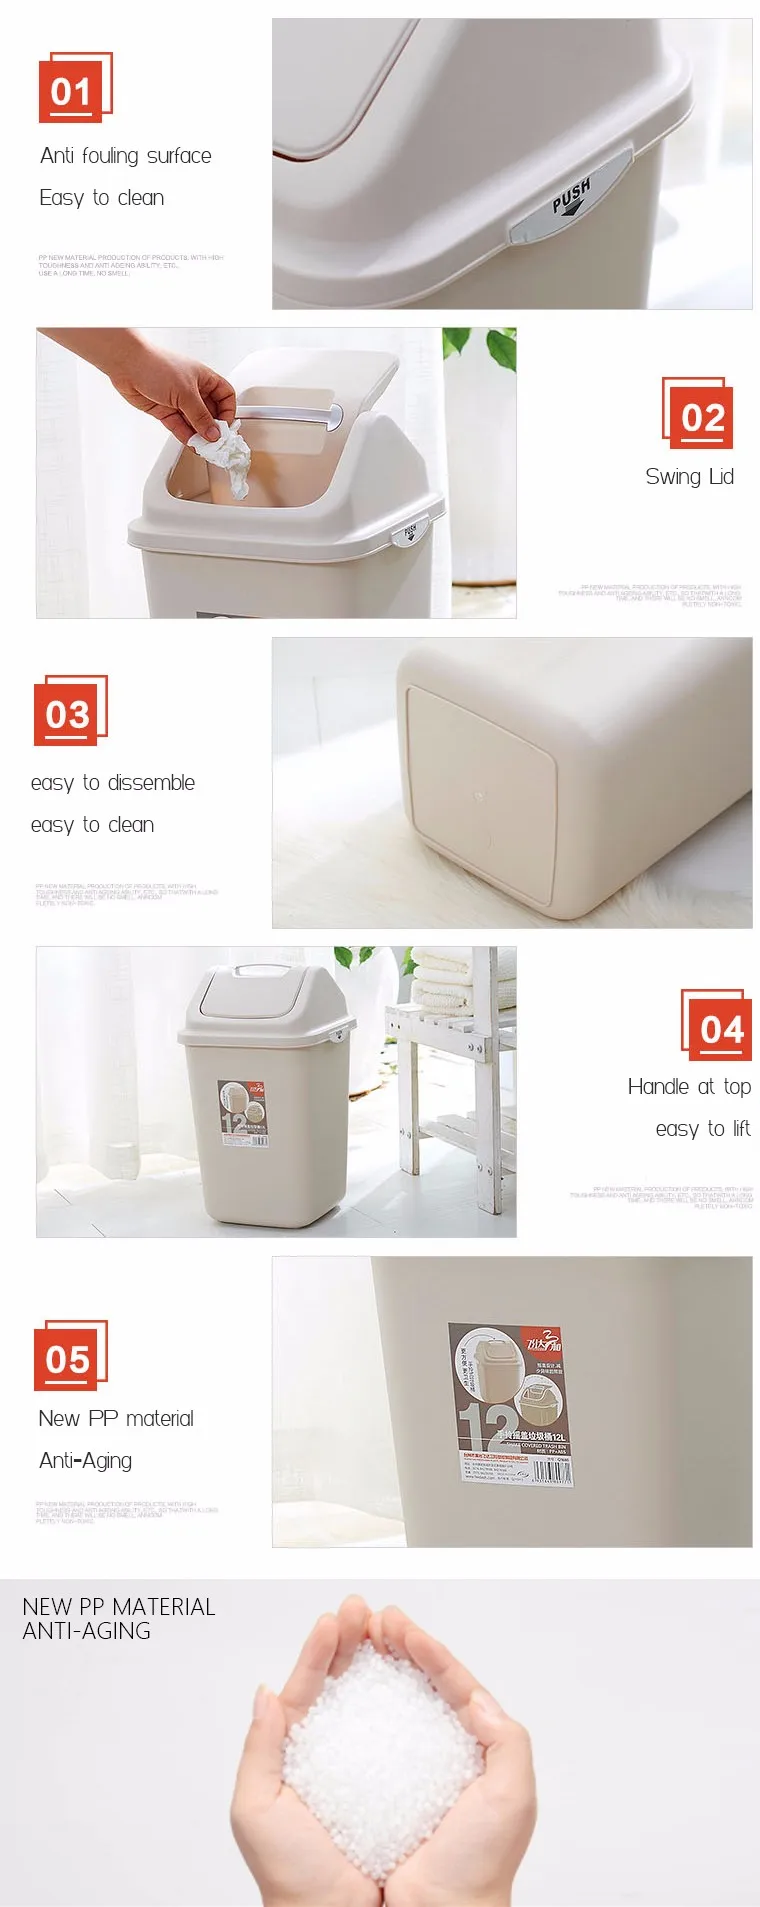 Home Living Room trash can with swing lid